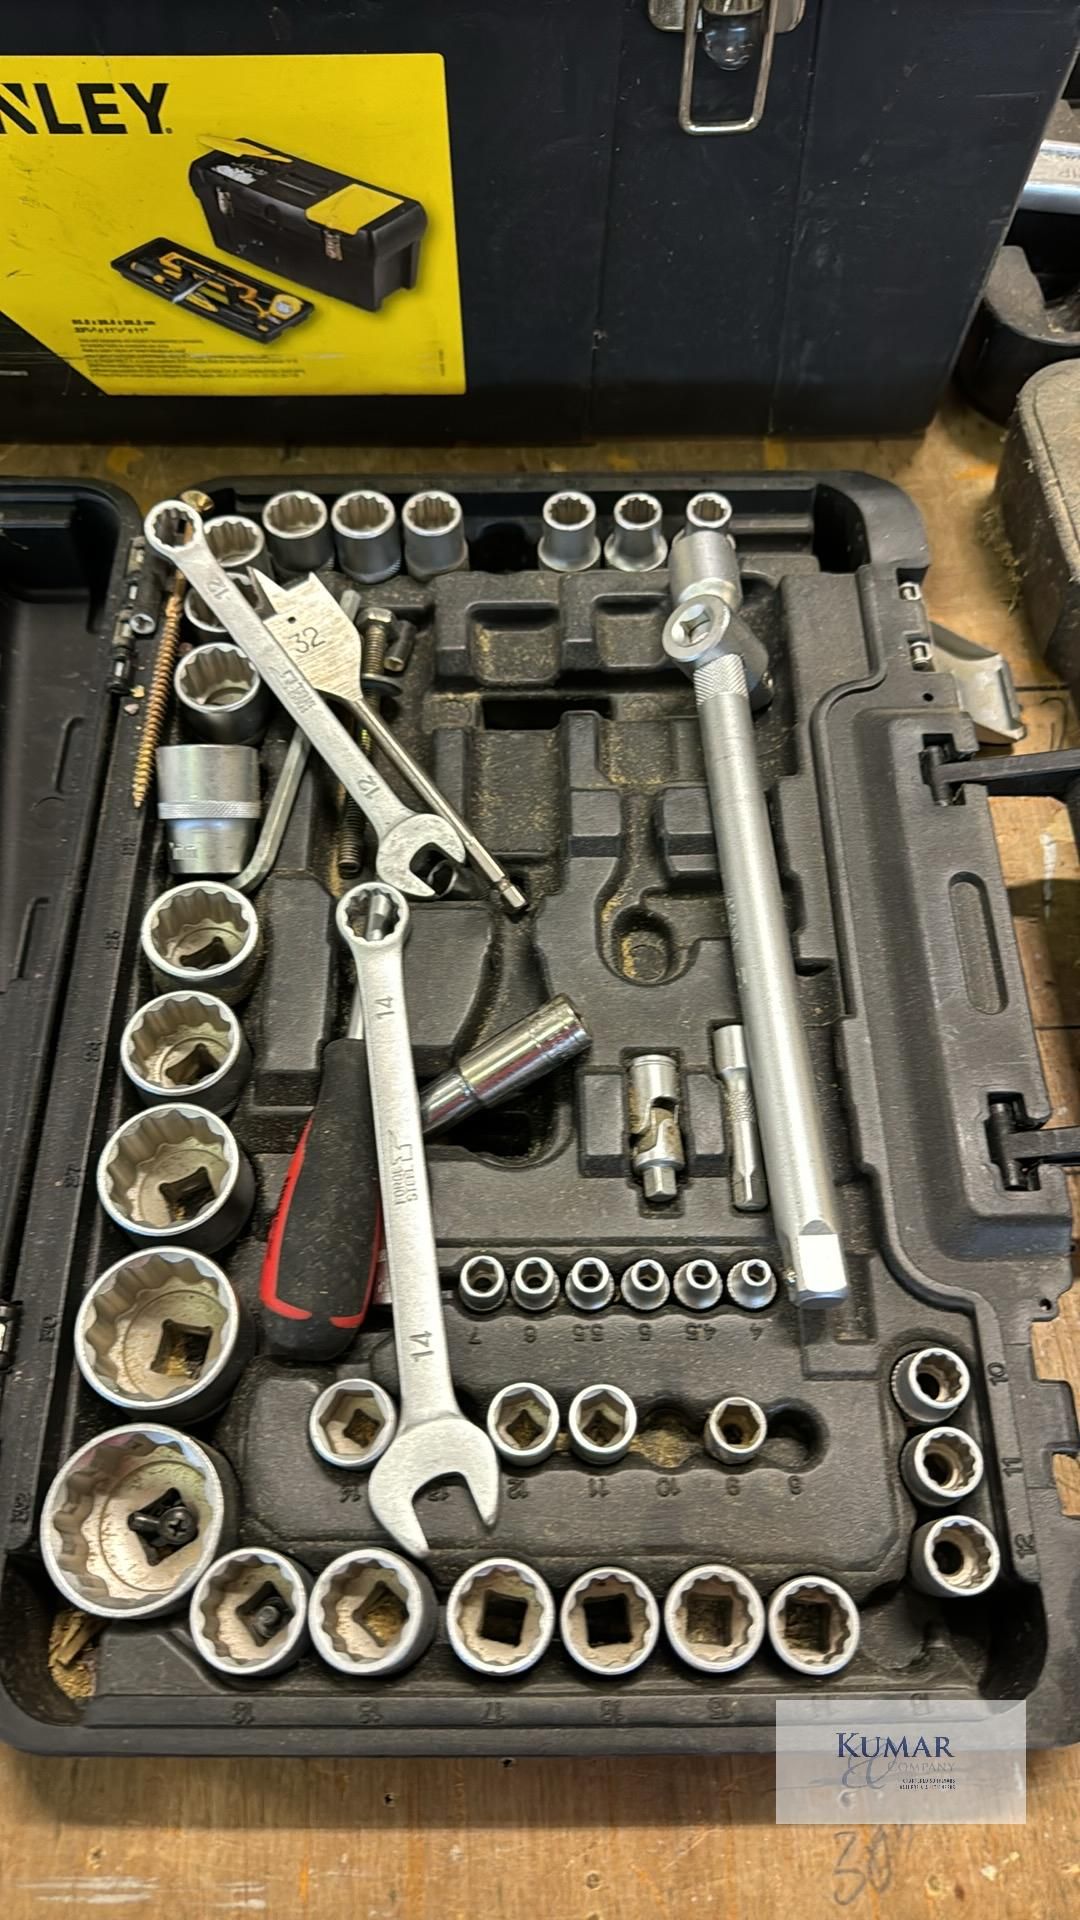 Socket Set with Tools in Black Carry Case & Stanley 24" Plastic Toolbox with Tools As Pictured - Image 3 of 7